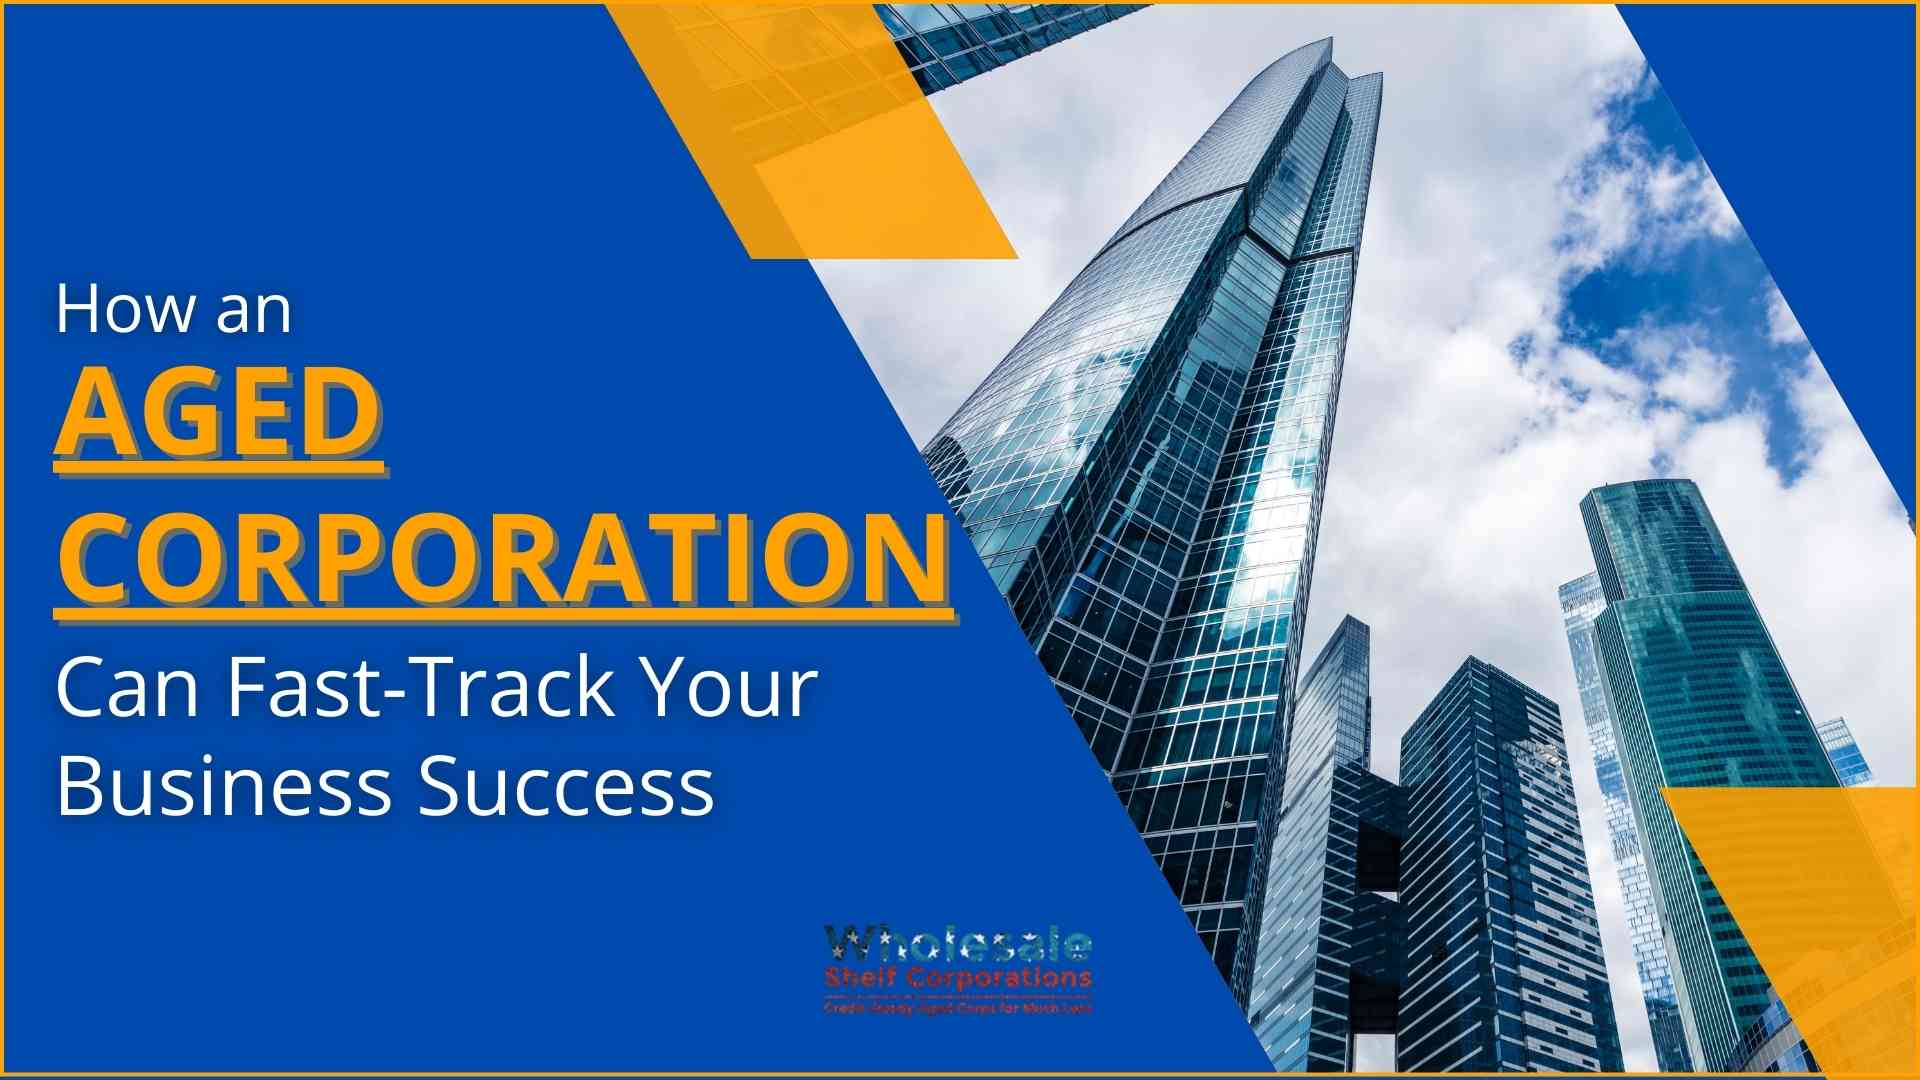 How An Aged Corporation Can Fast-Track Your Business Success